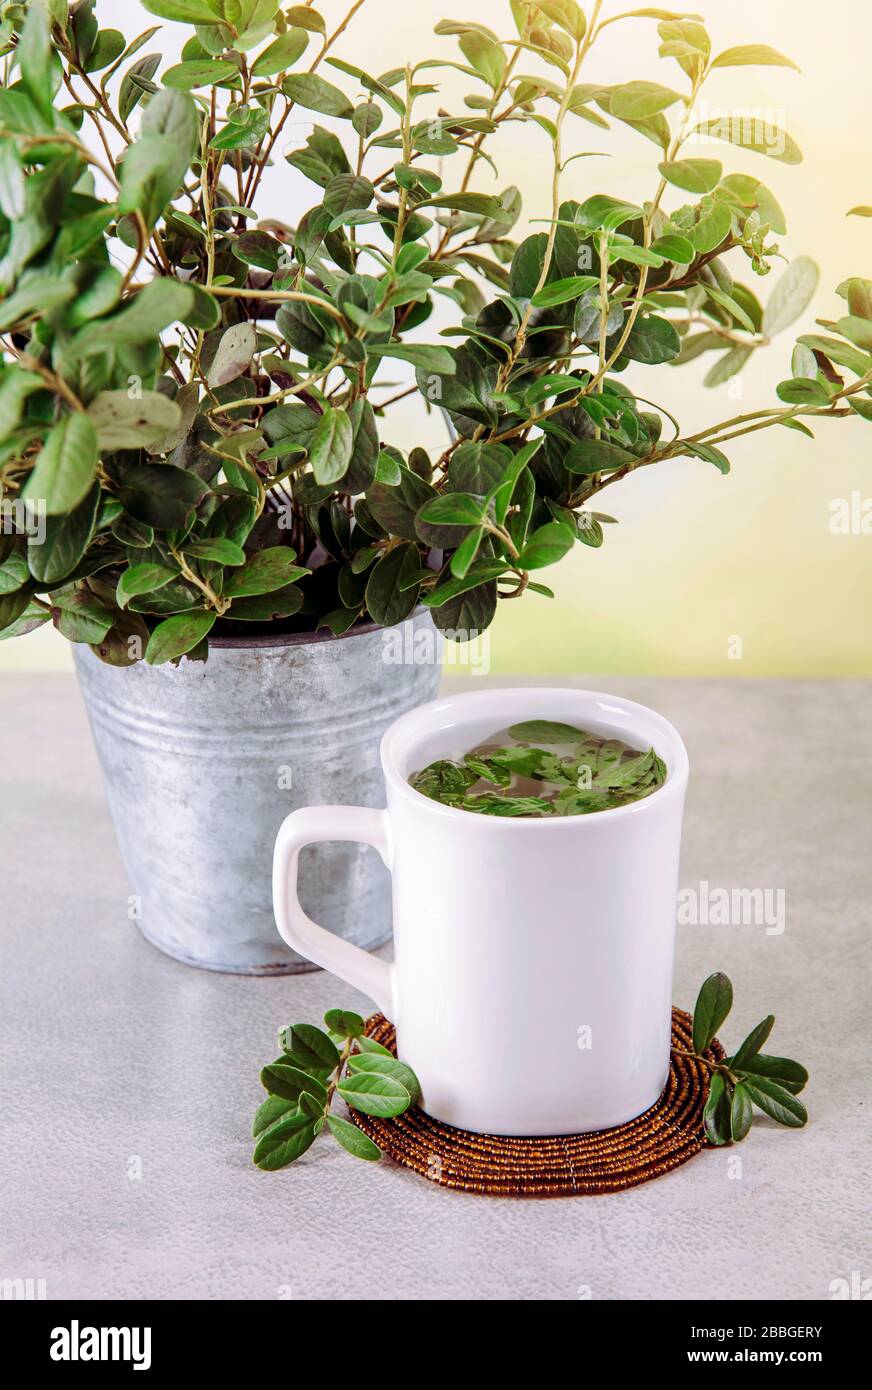 Lingonberry (Vaccinium vitis-idaea) leaves used to make herbal medicine tea drink. Zinc bucket with fresh branches on background for decoration. Stock Photo